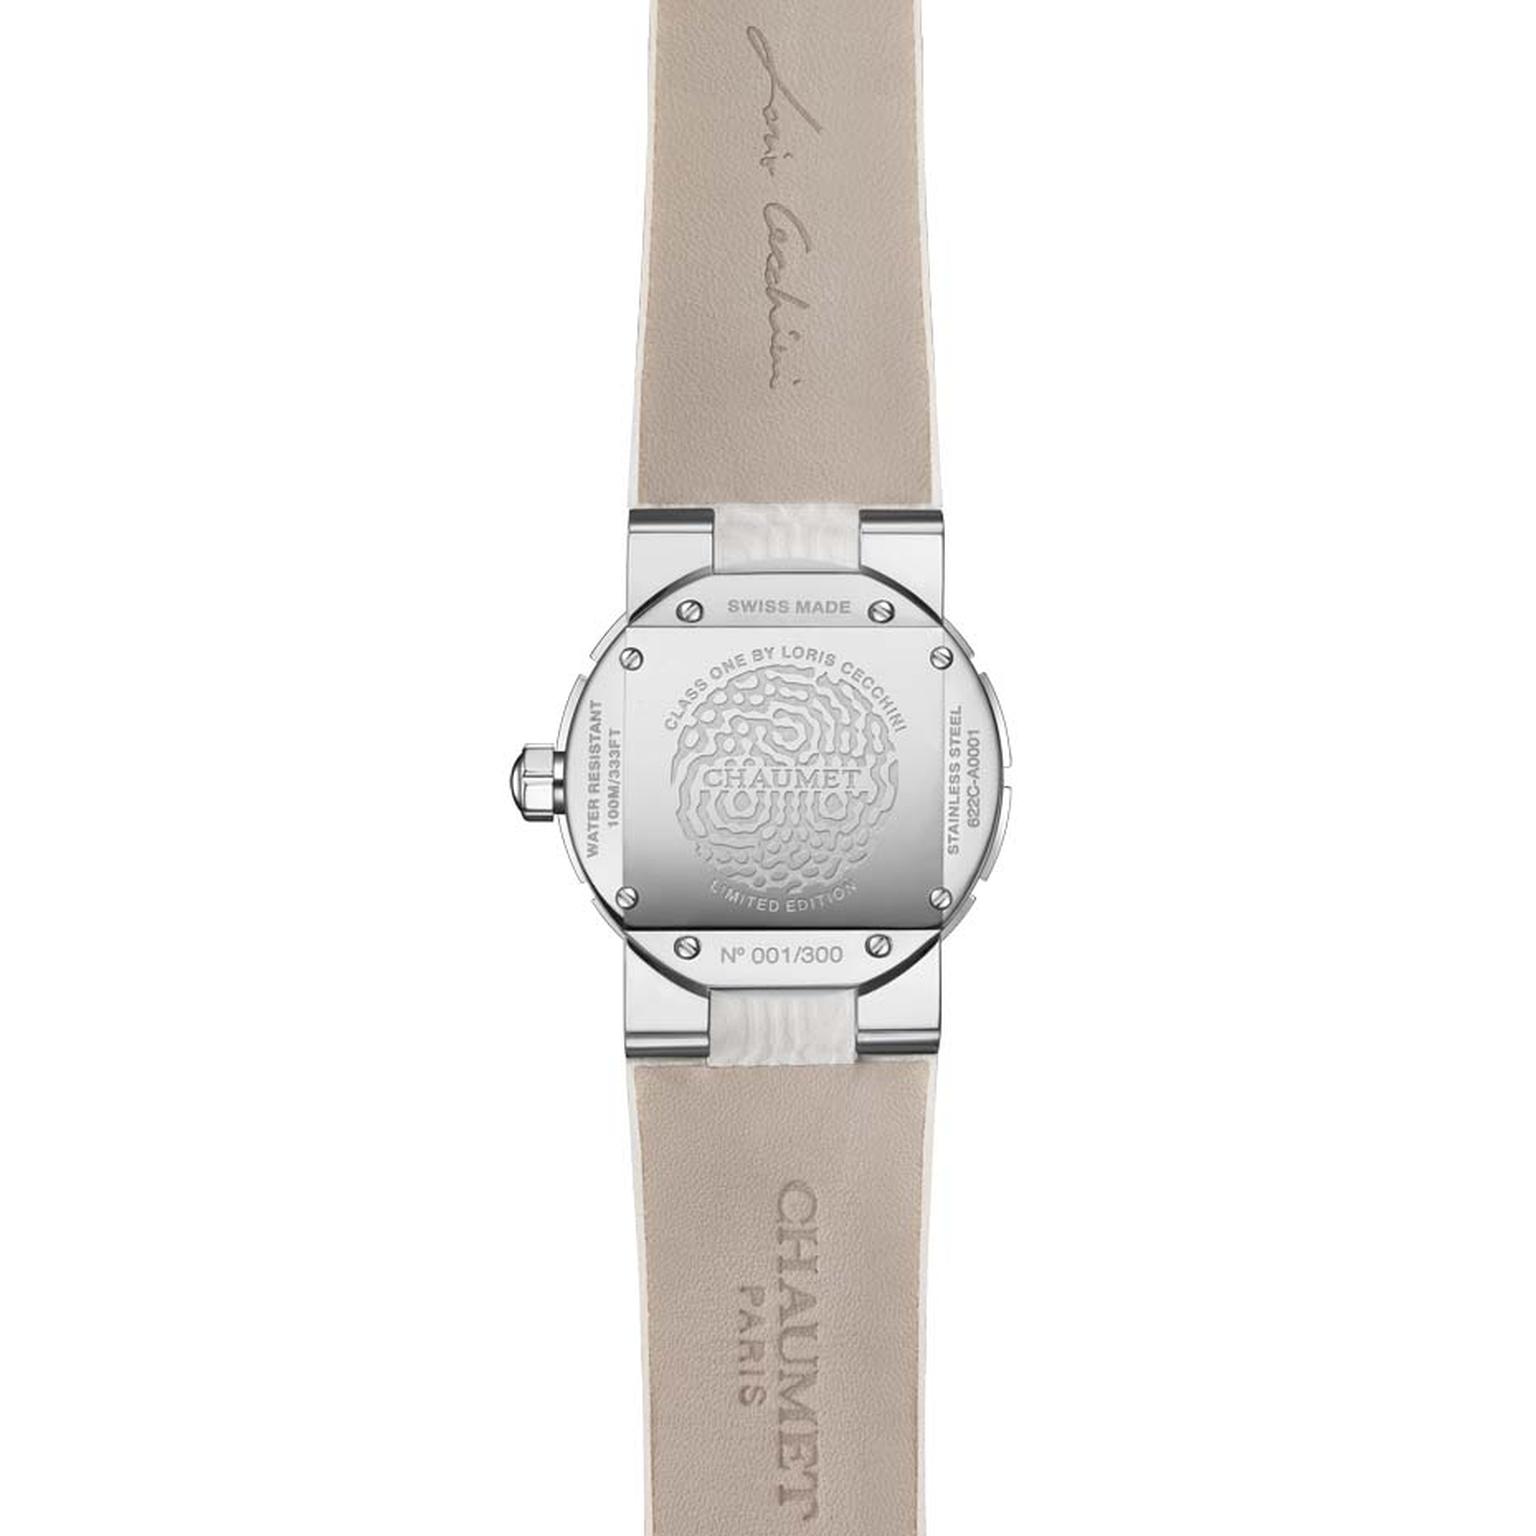 The 33mm stainless steel case has been etched with Loris Cecchini’s water vibration pattern on the reverse of each of the limited-edition Chaumet Class One ladies' watches.